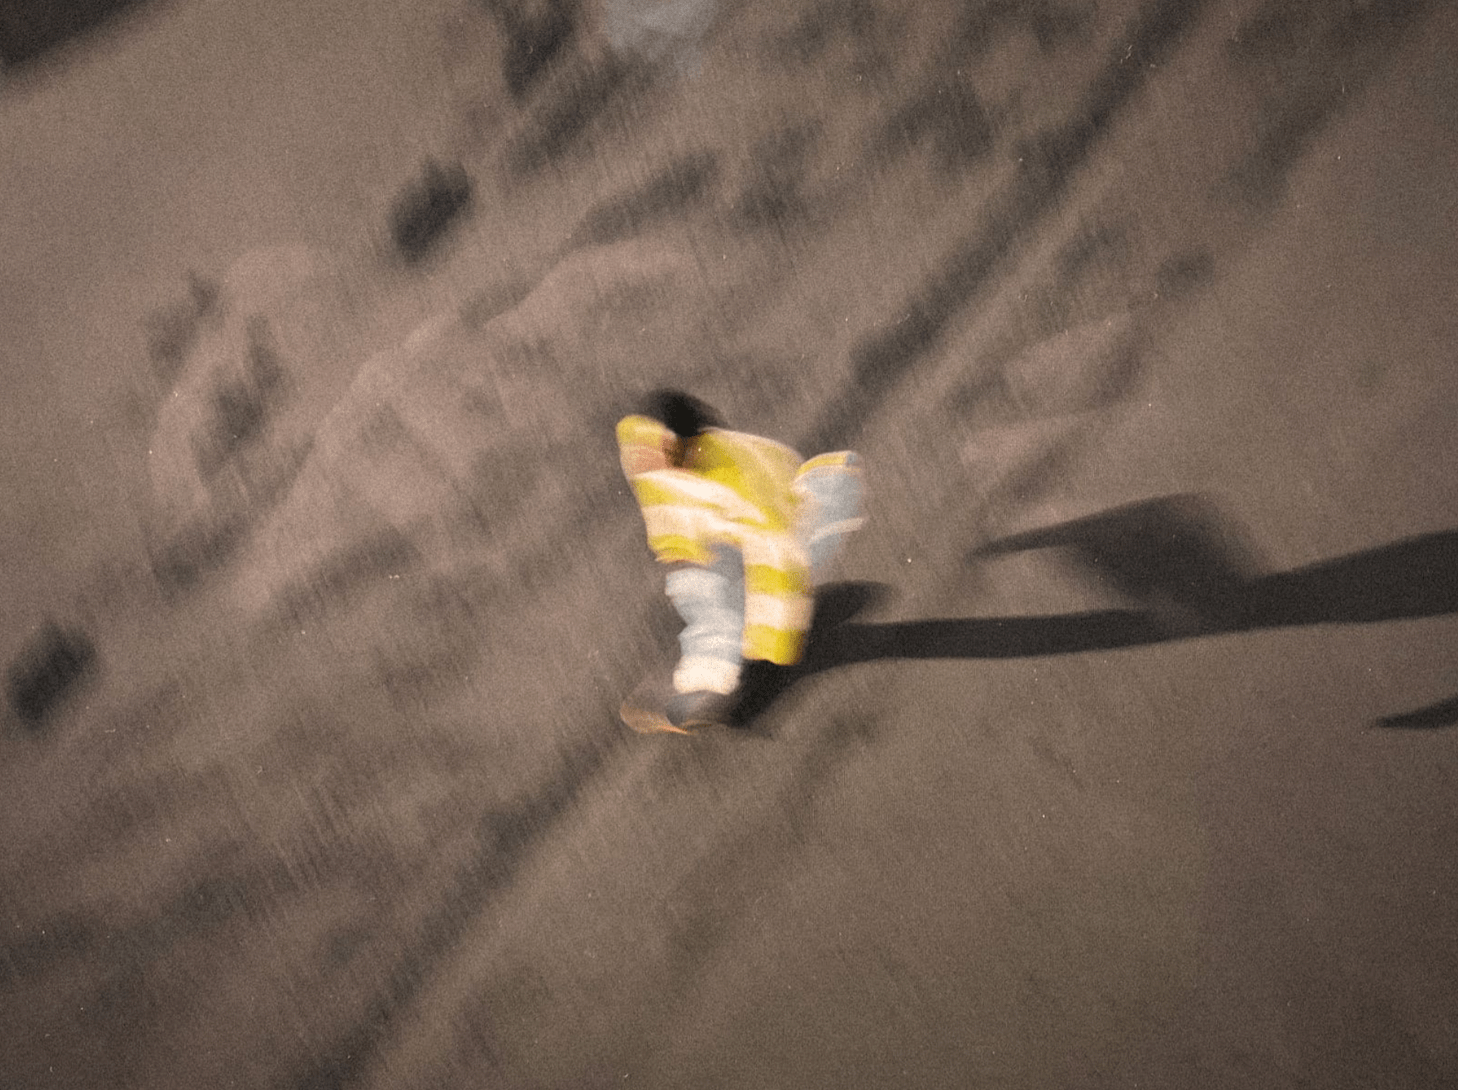 blurred photo of a skateboarder in motion